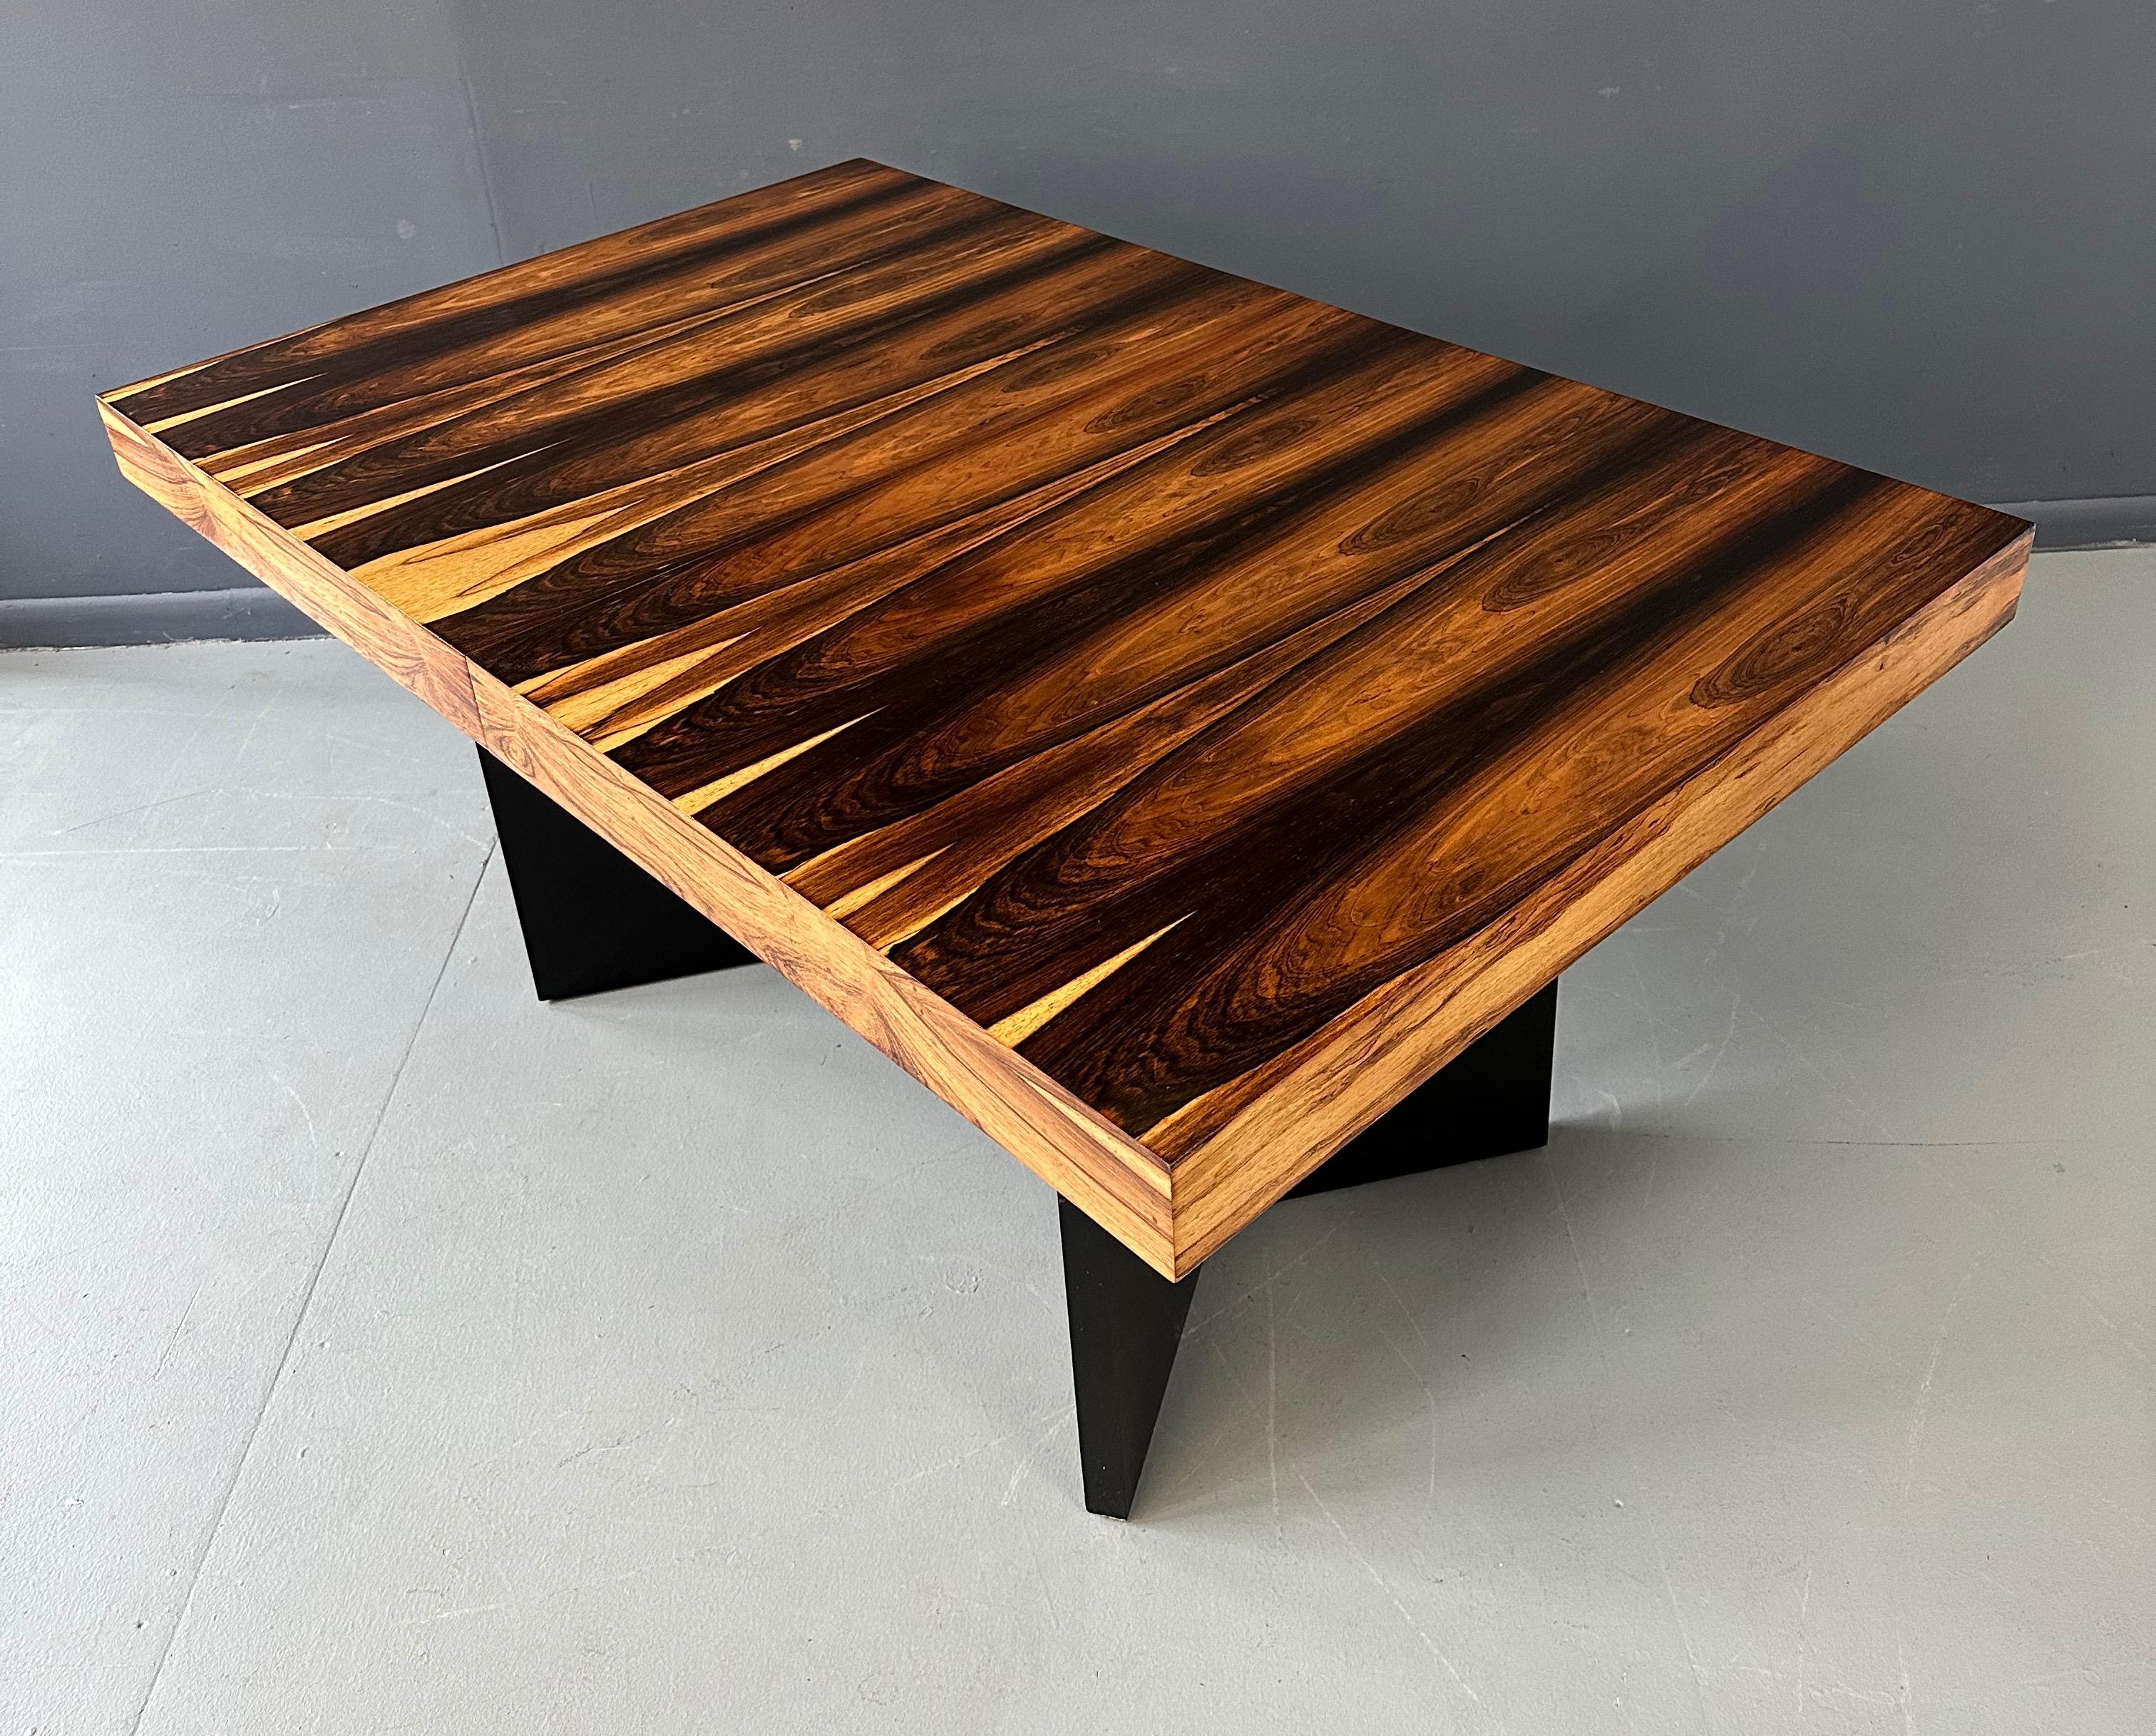 Beautiful dining table in a wonderfully unusual Marabunda Veneer. Sitting on two triangular legs deep brown in color, this table comes with one leaf that is 15